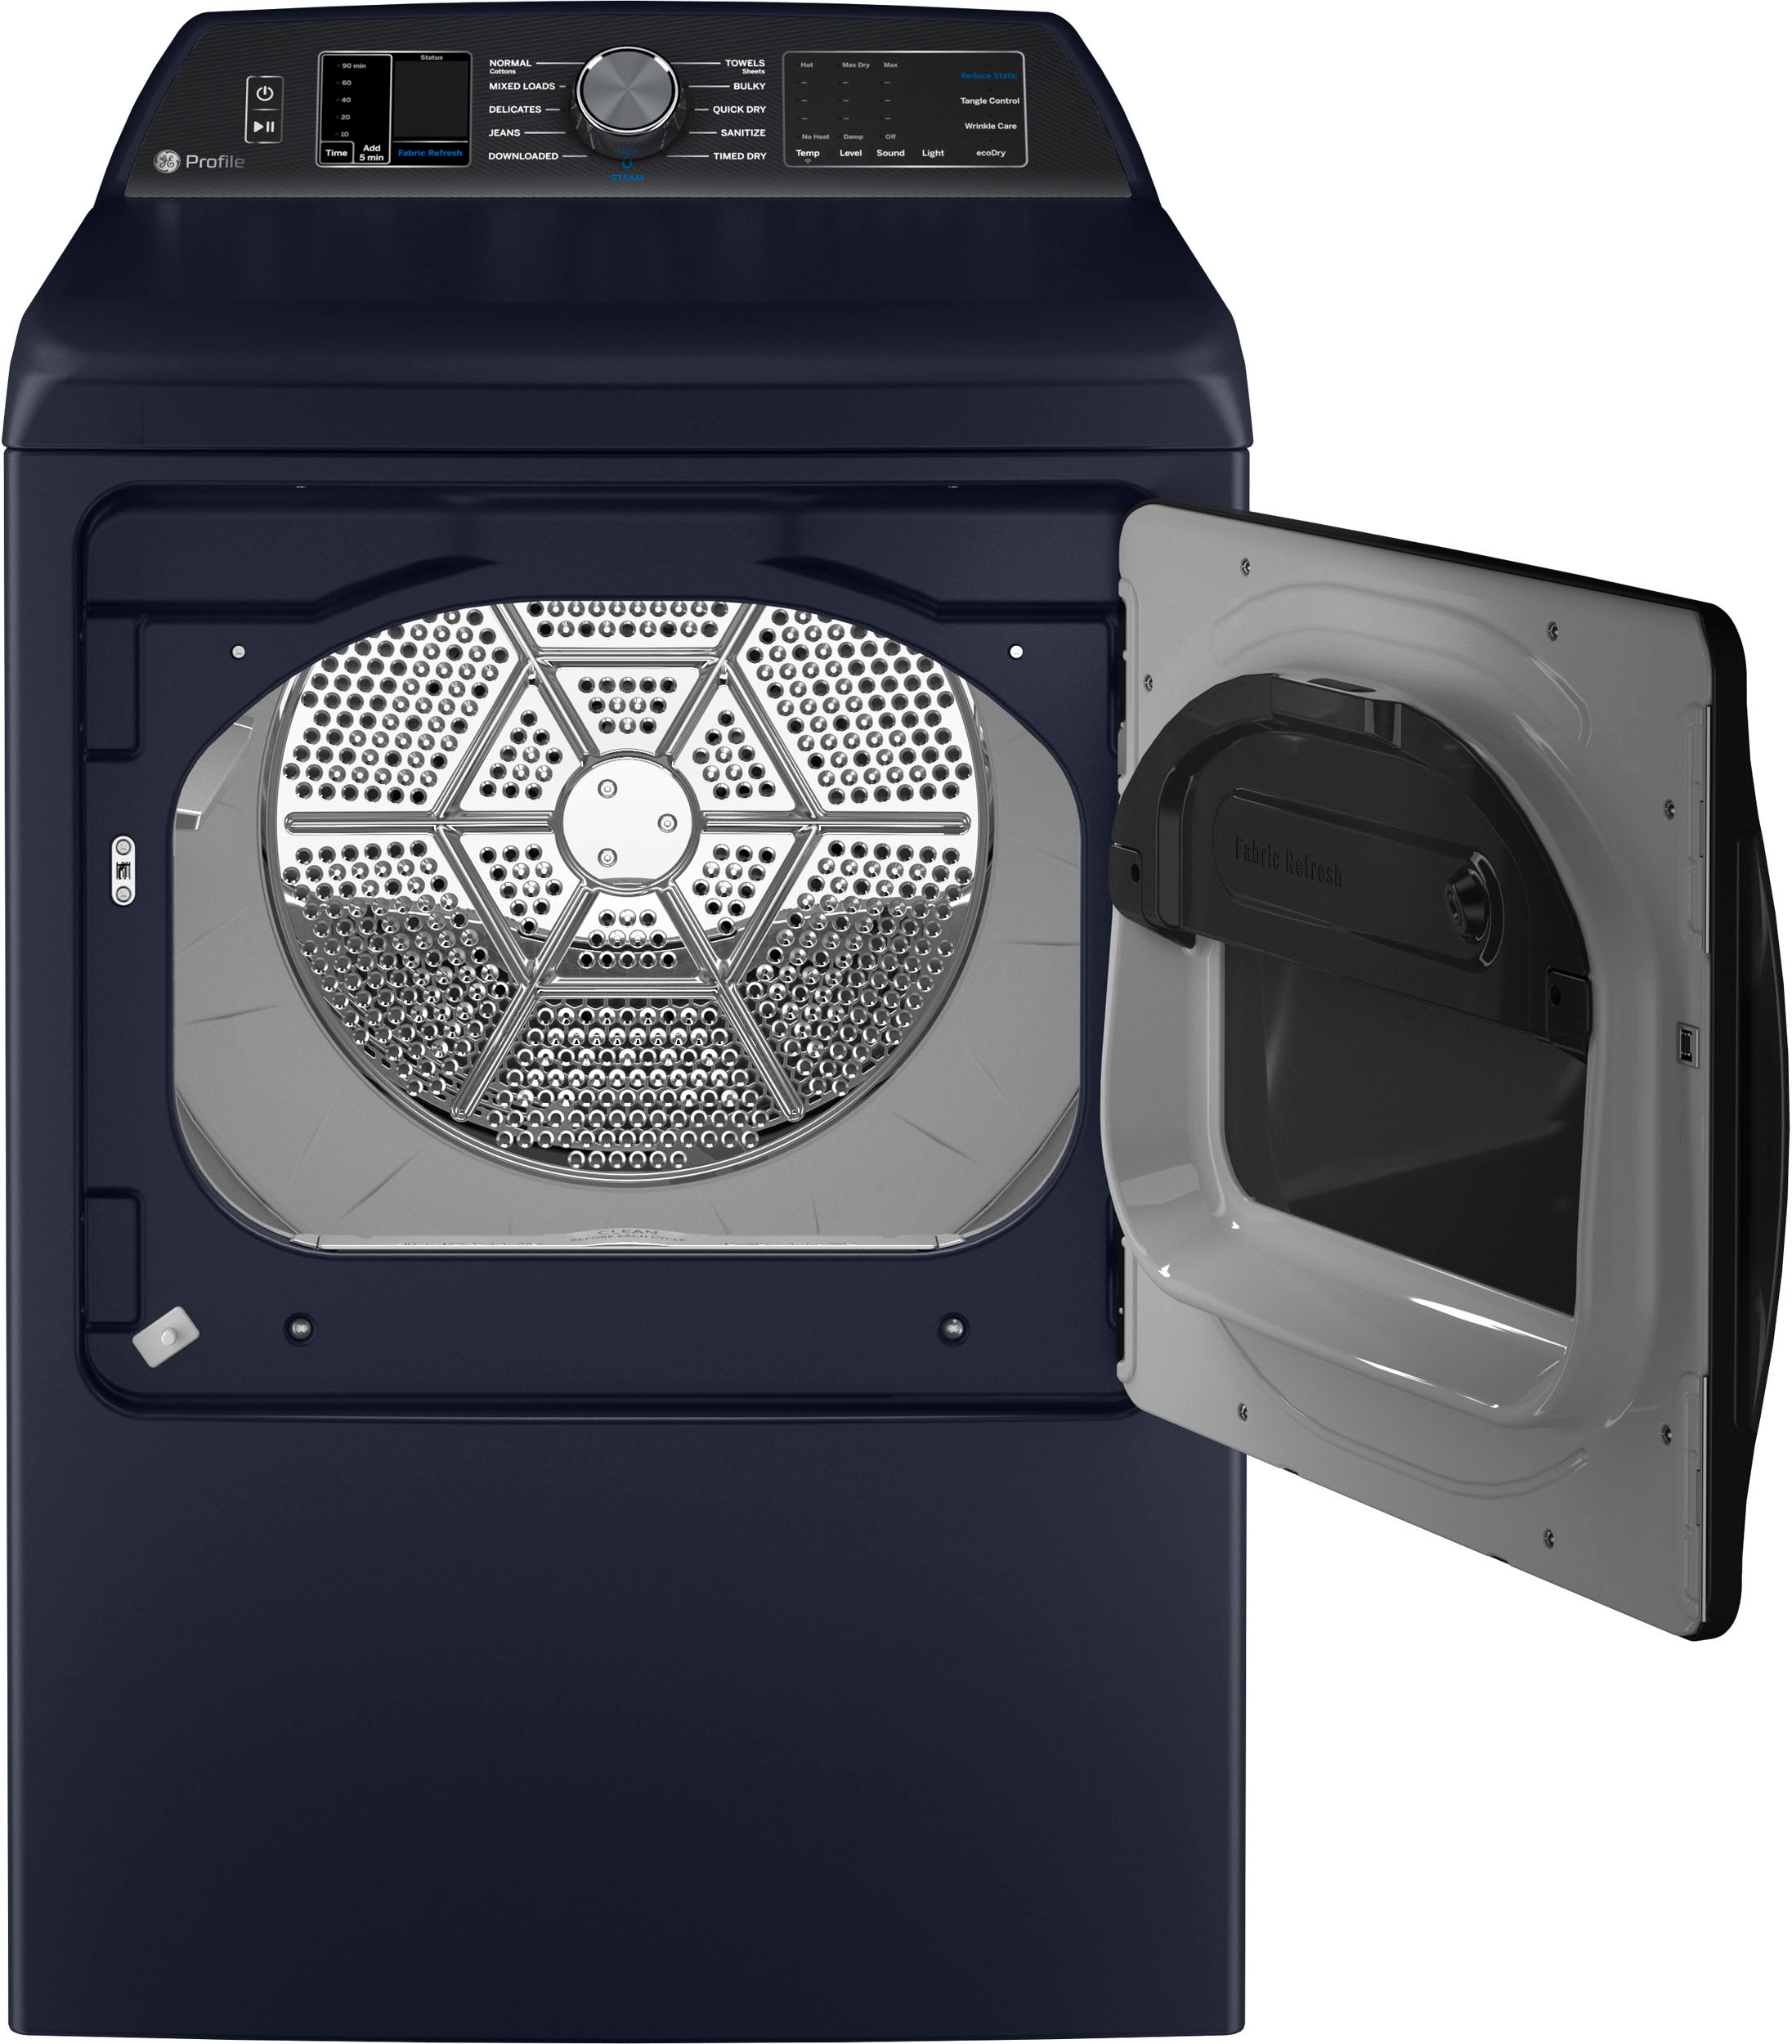 Angle View: GE Profile - 7.3 cu. ft. Smart Electric Dryer with Fabric Refresh, Steam, and Washer Link - Sapphire Blue